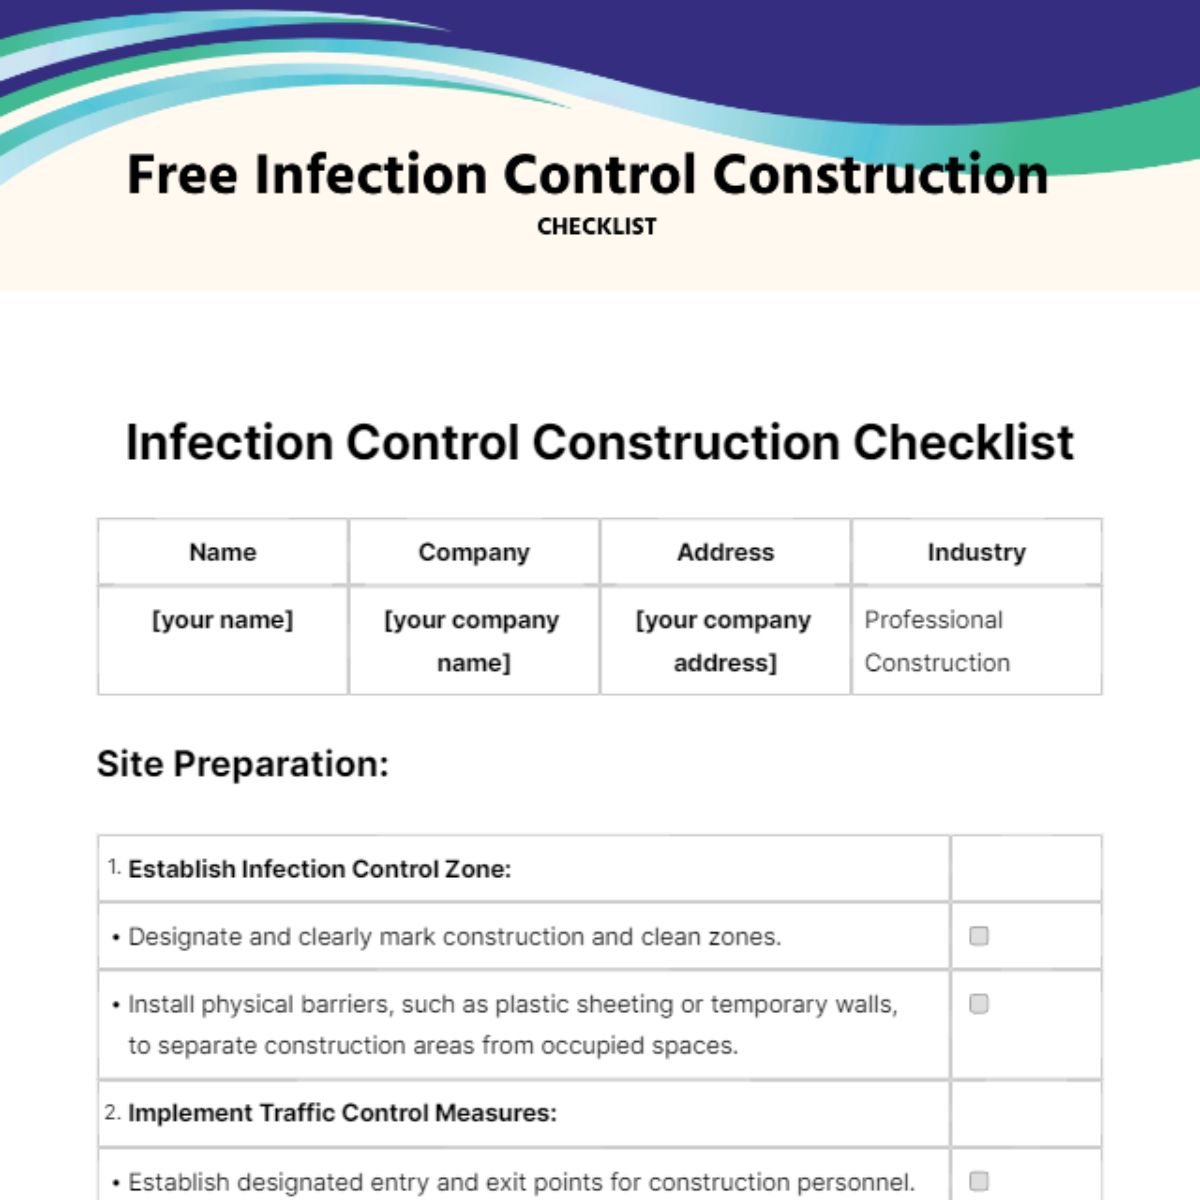 Infection Control Construction Checklist Template